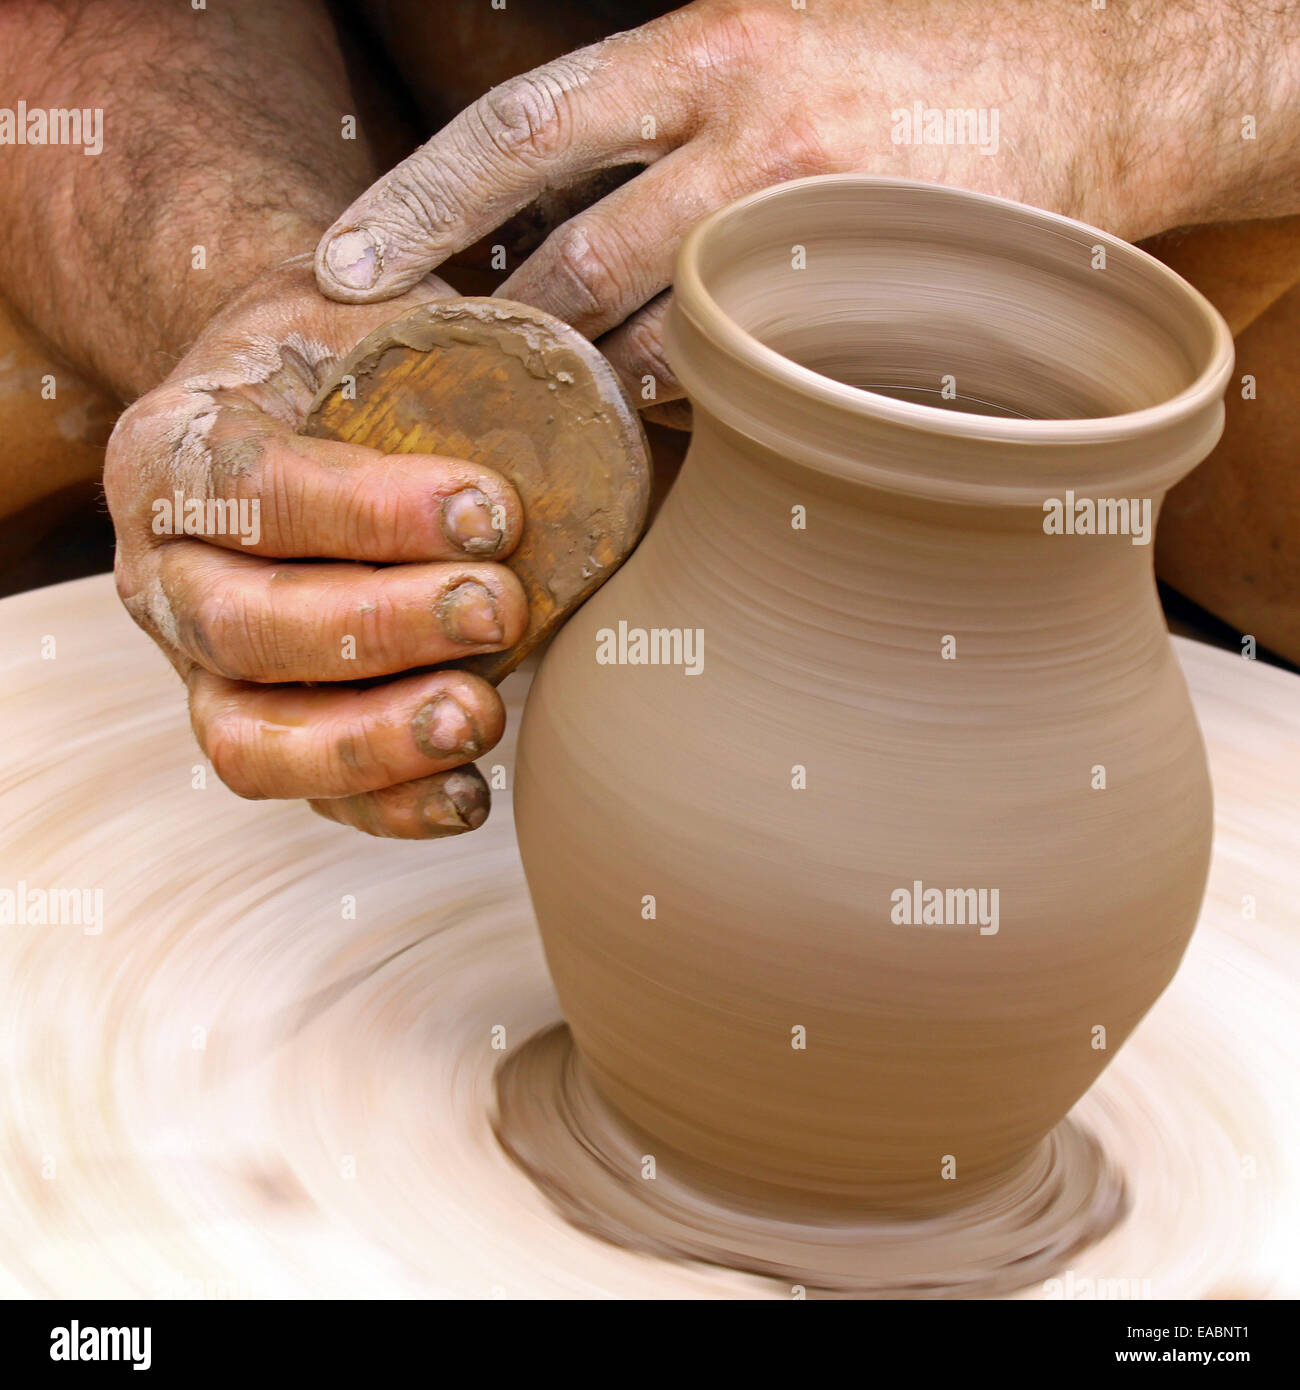 Potter Makes on the Pottery Wheel Clay Pot. Hands of the Master Close-up  during Work Stock Image - Image of shape, kickwheel: 225021903